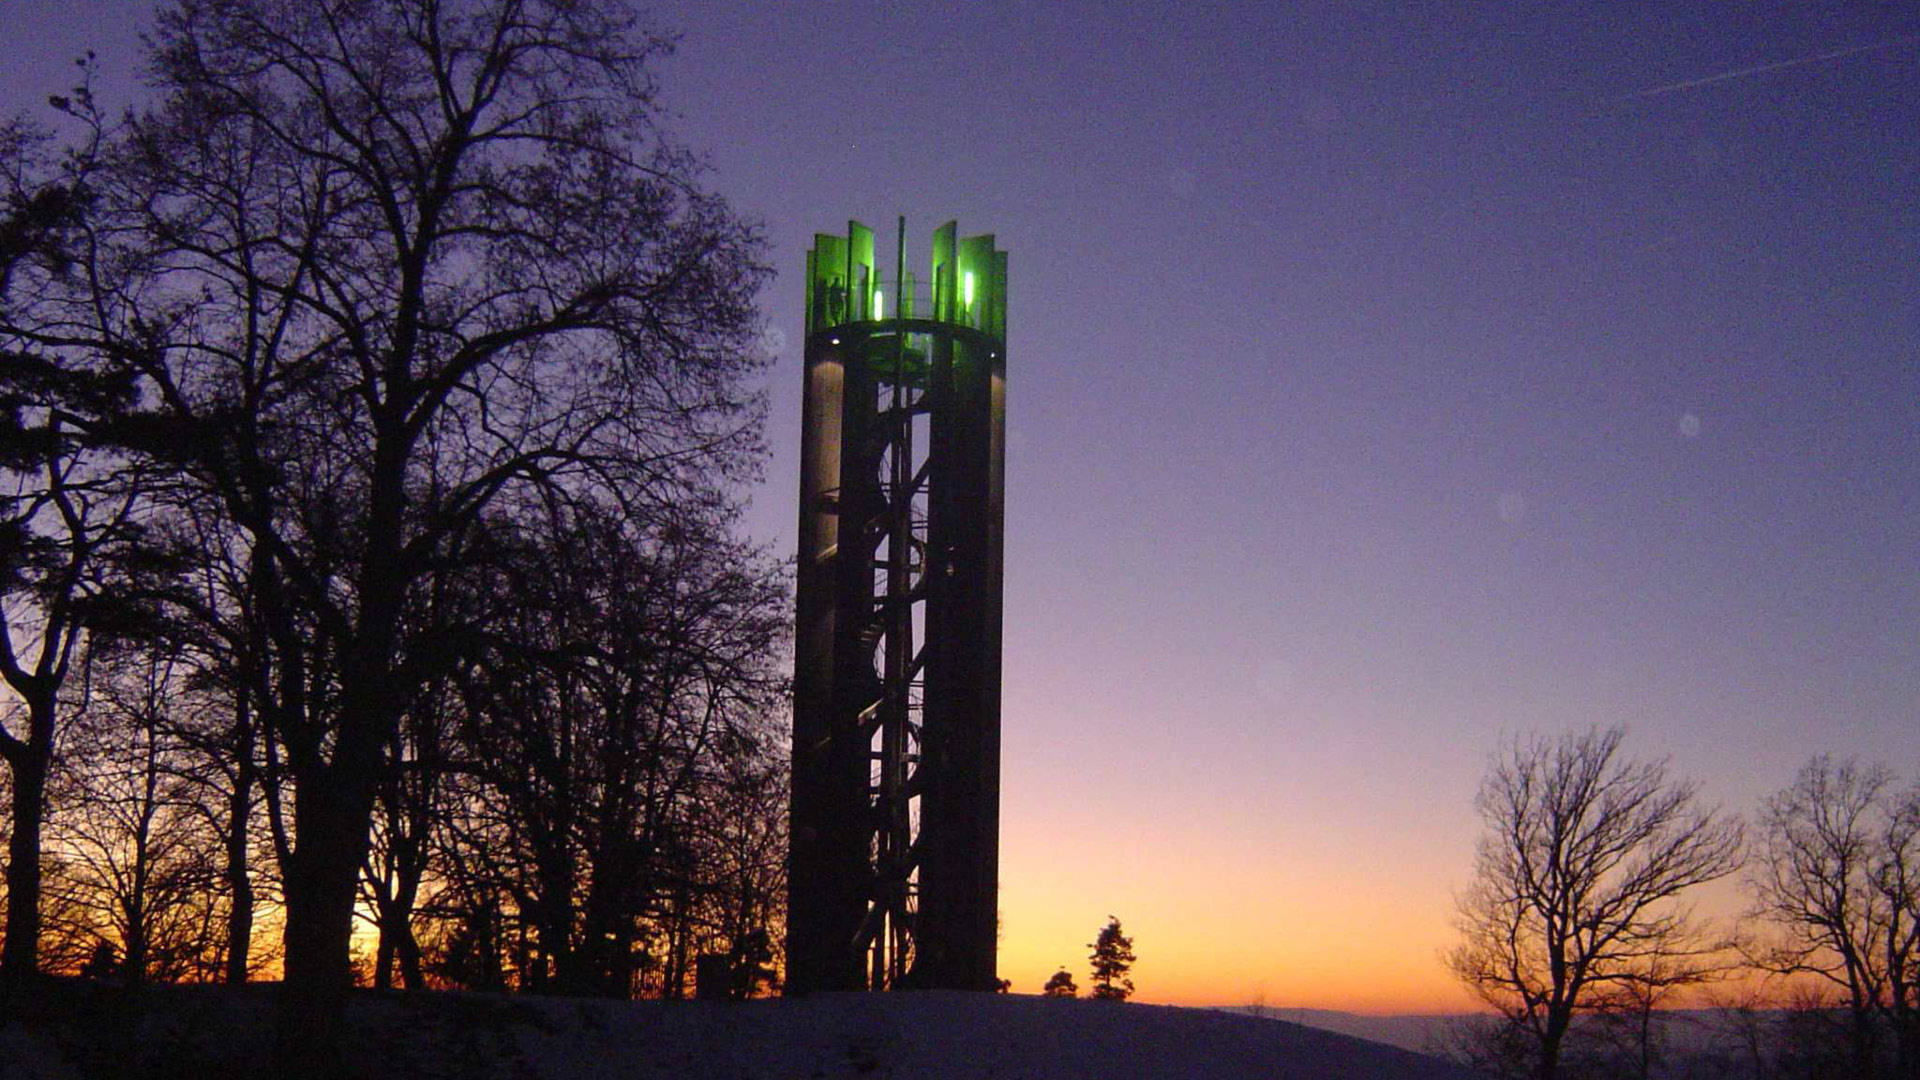 The 22-meter-high observation tower on the Gurten is lit by green light as the sun goes down.